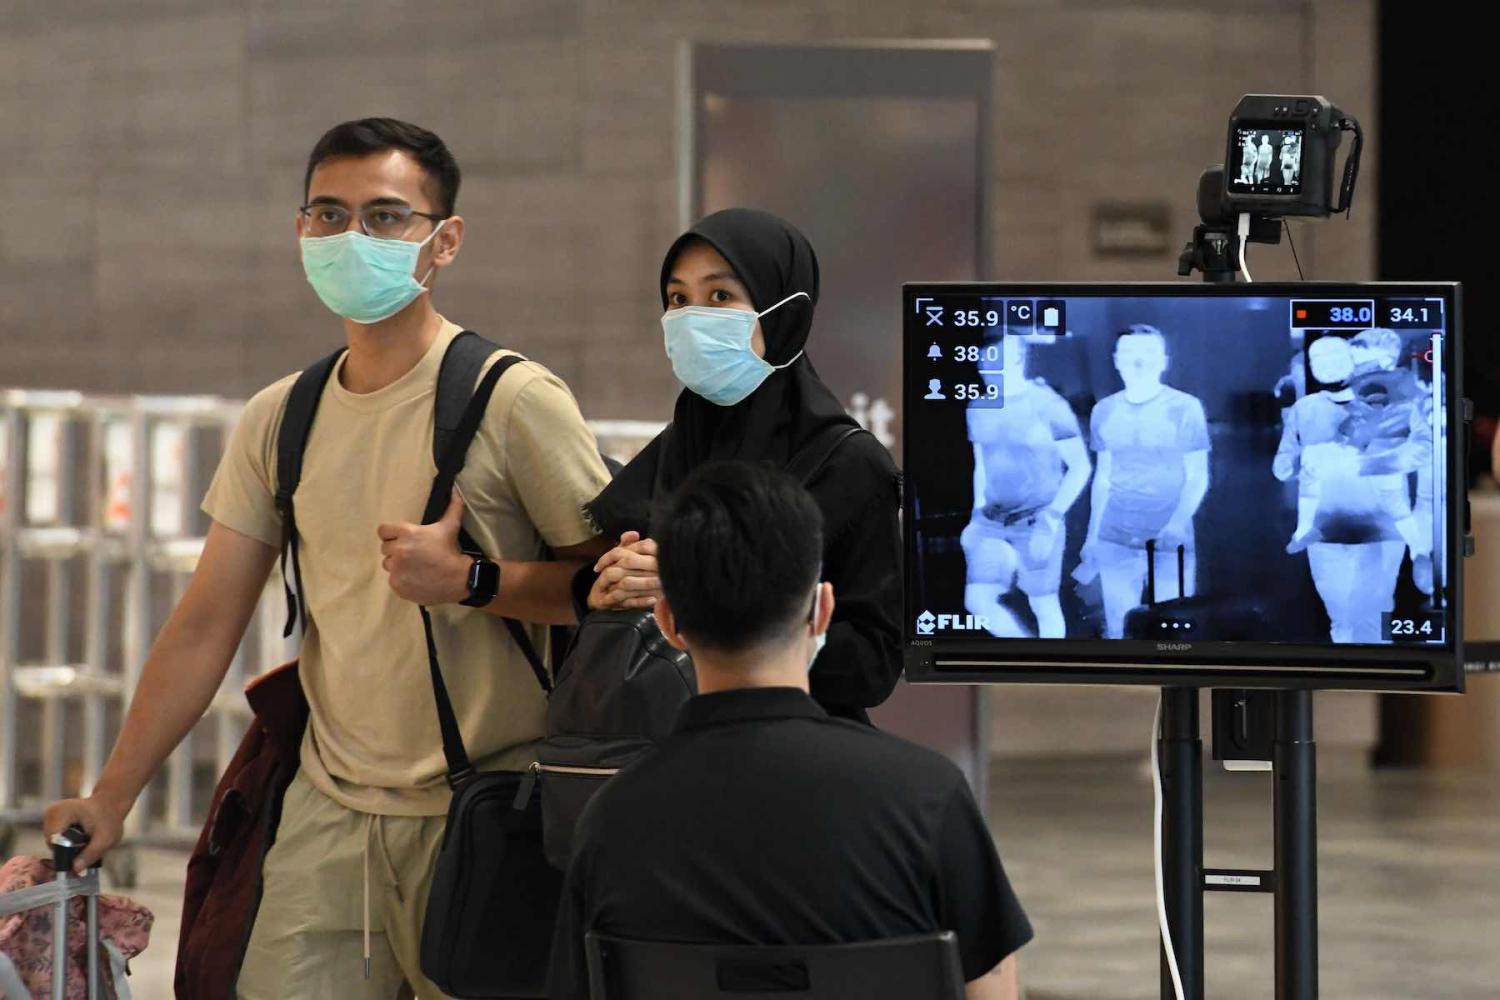 A couple walking past a temperature screening check at Changi International Airport in Singapore, 27 February 2020 (Roslan Rahman/AFP via Getty Images)